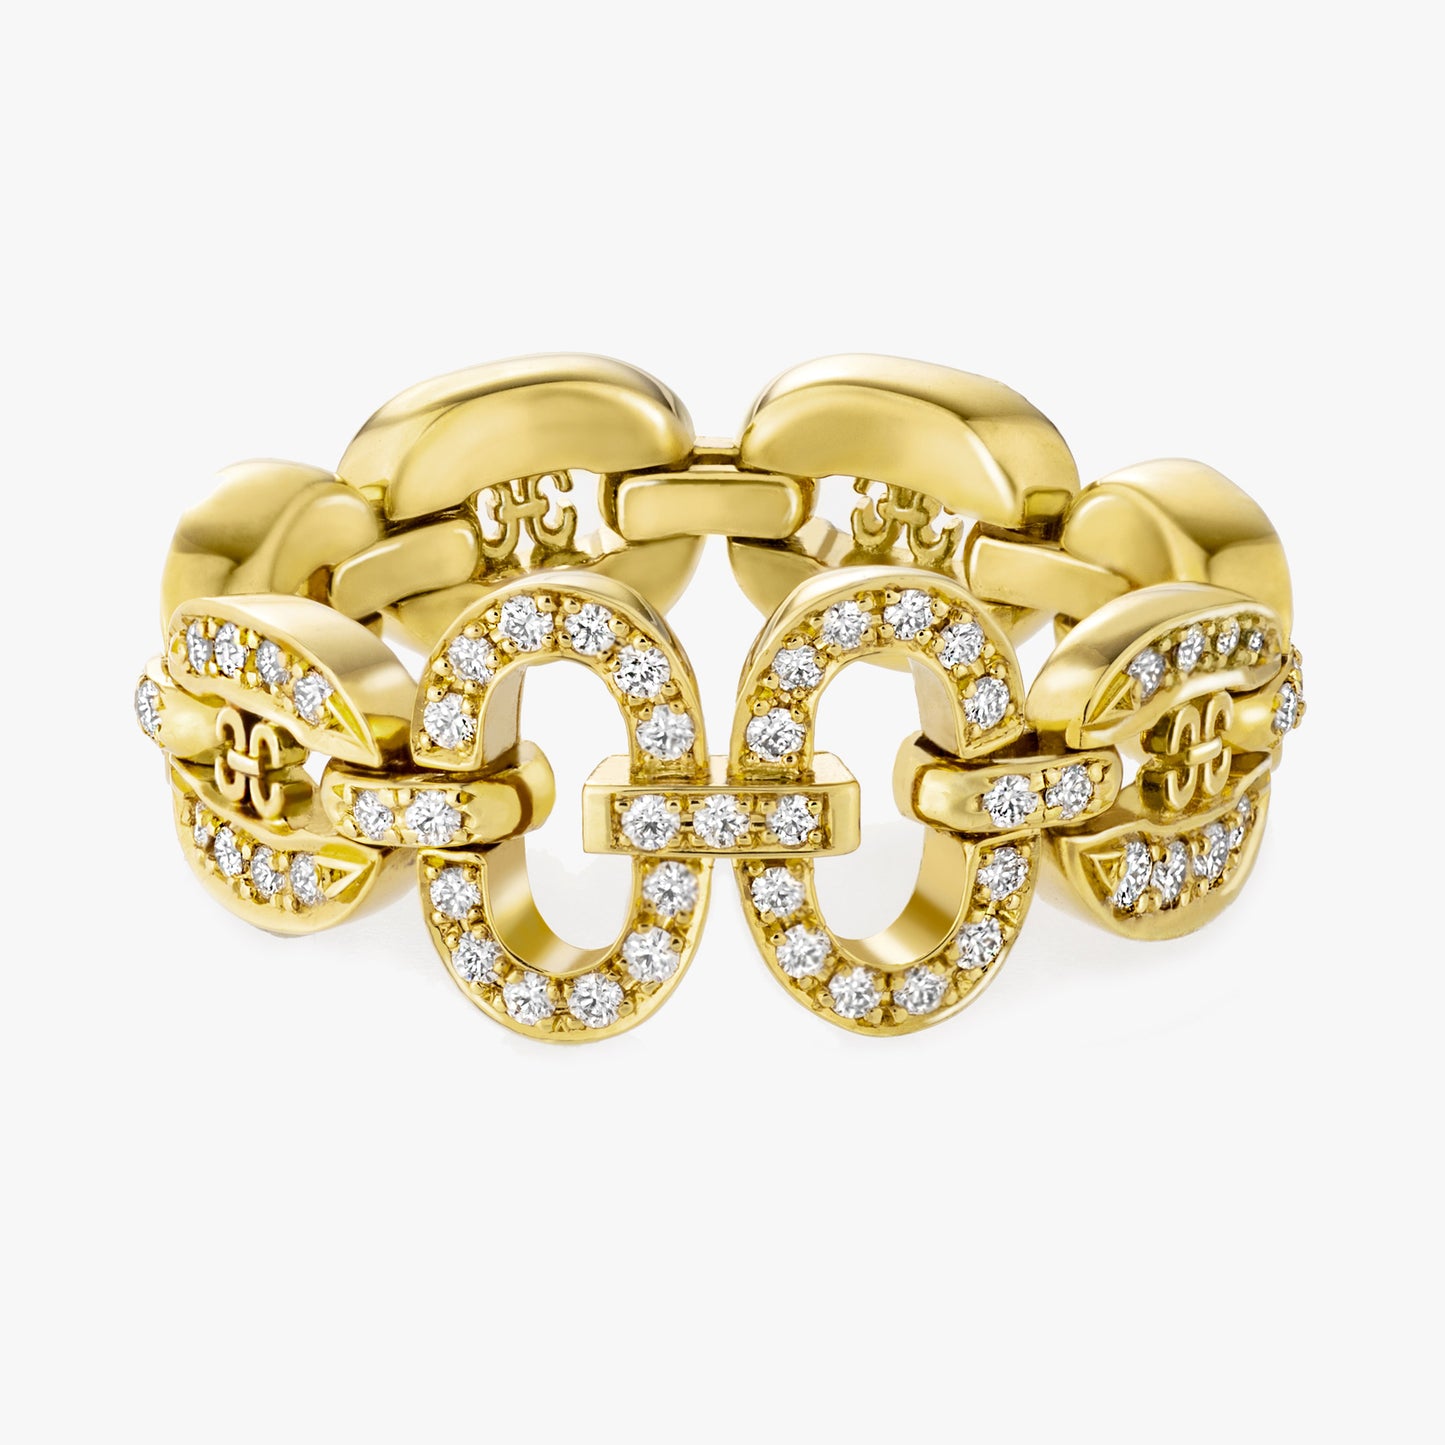 Links Iconic Yellow Gold Chain ring